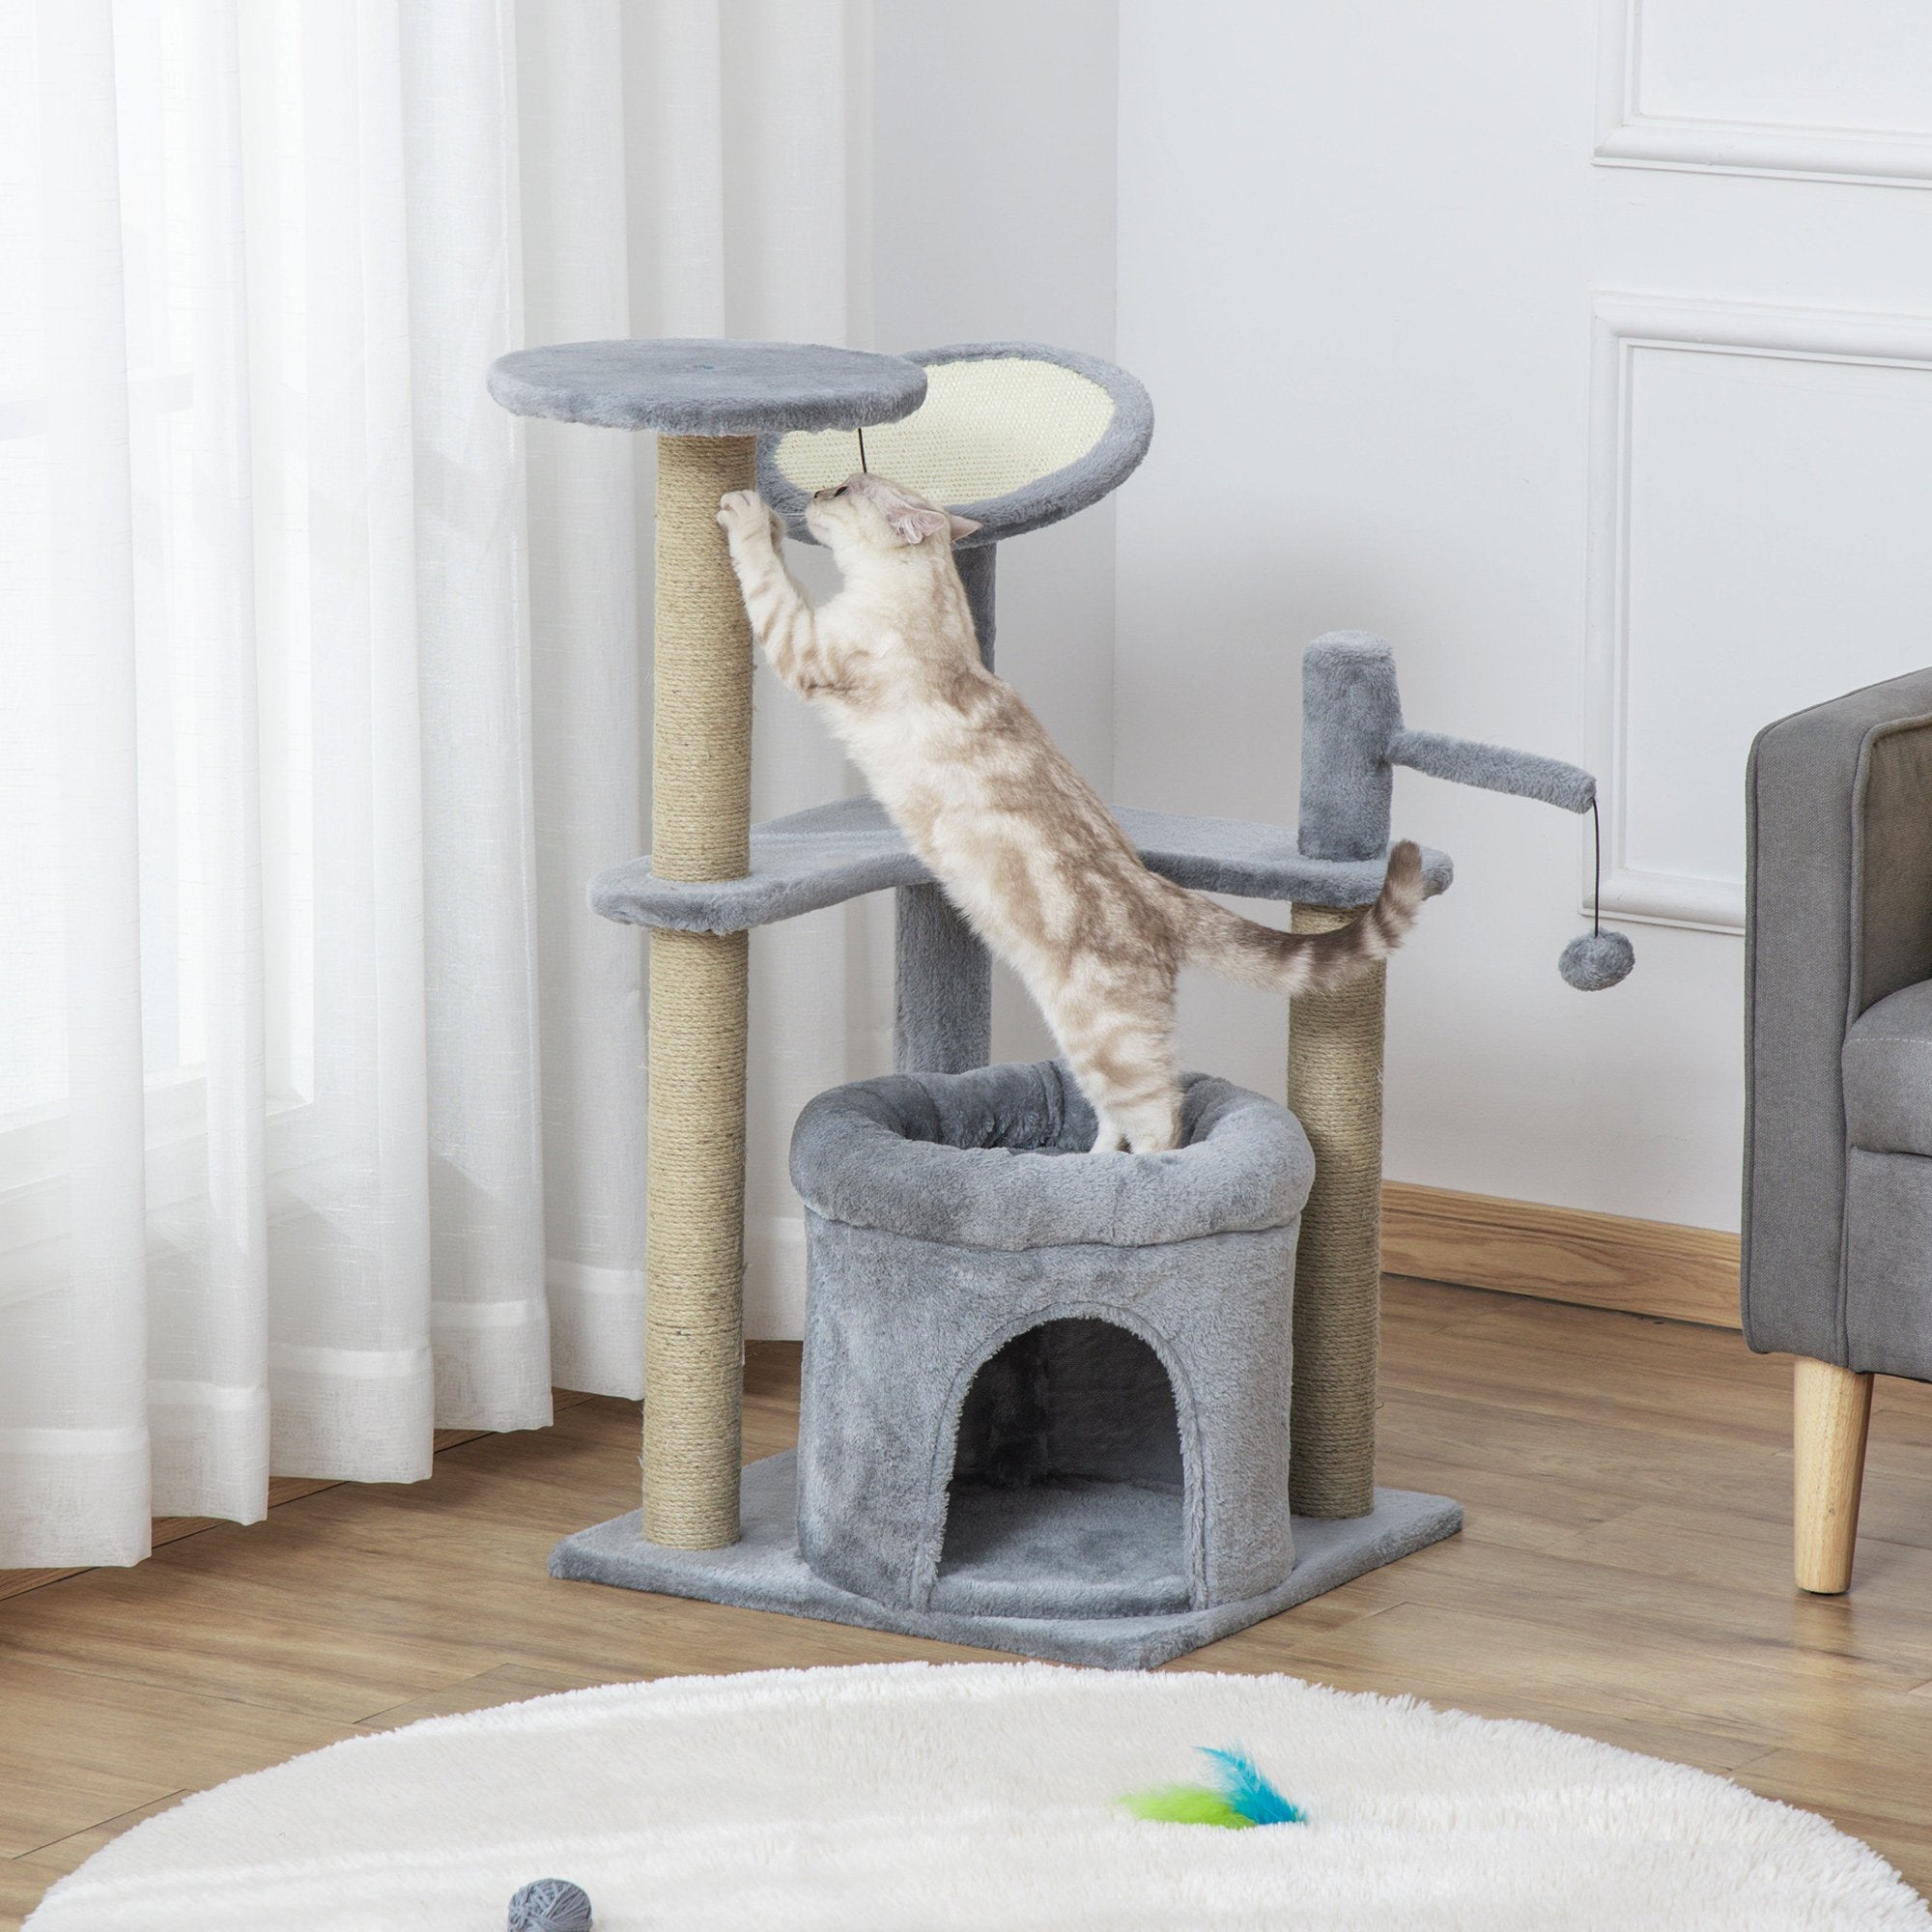 87 cm Cat Tree for Indoor Cats, Kitten Tree Tower with Scratching Posts Pad, Cat Condo, Plush Perches, Hanging Ball - Grey, PawHut,